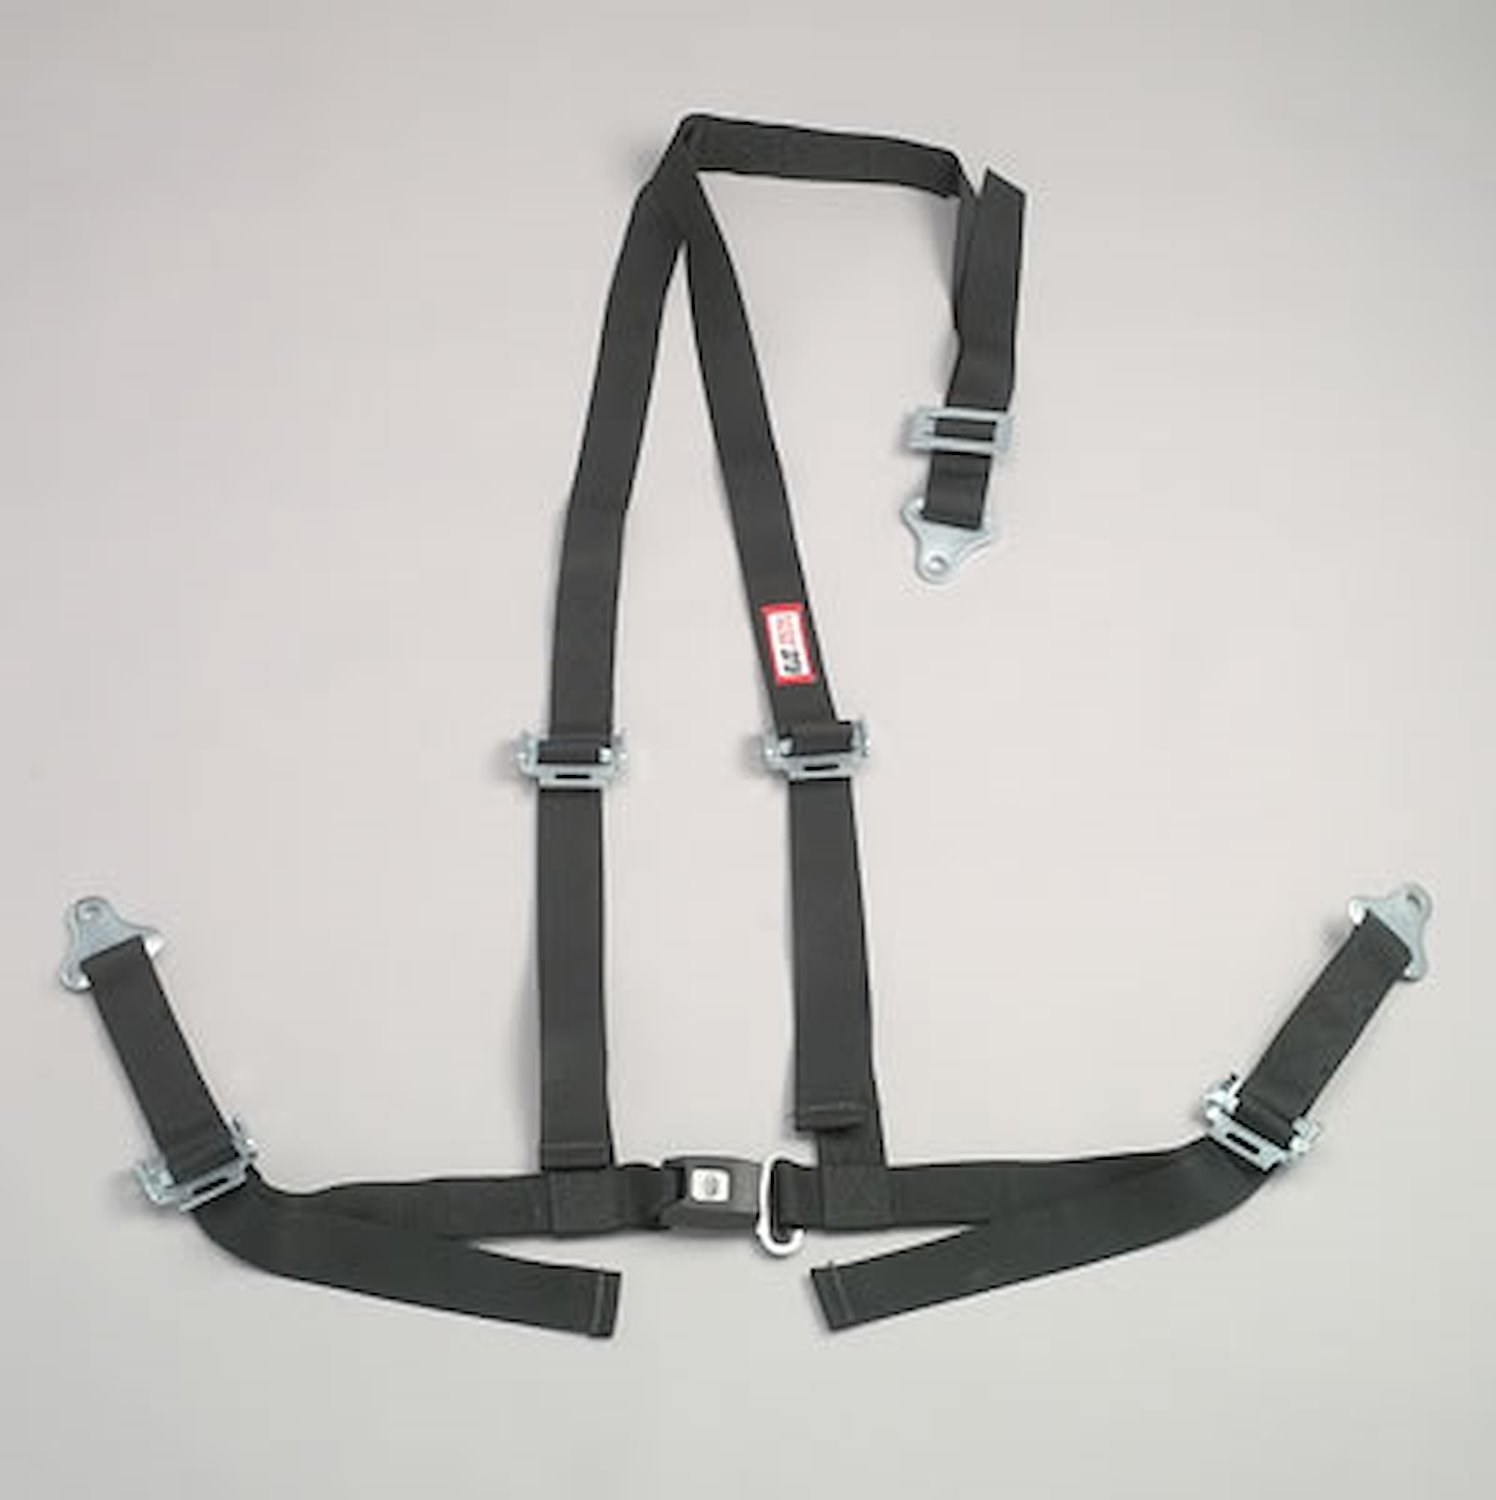 NON-SFI B&T HARNESS 2 PULL UP Lap Belt SNAP 2 S. H. Y FLOOR Mount WRAP/BOLT w/STERNUM STRAP RED